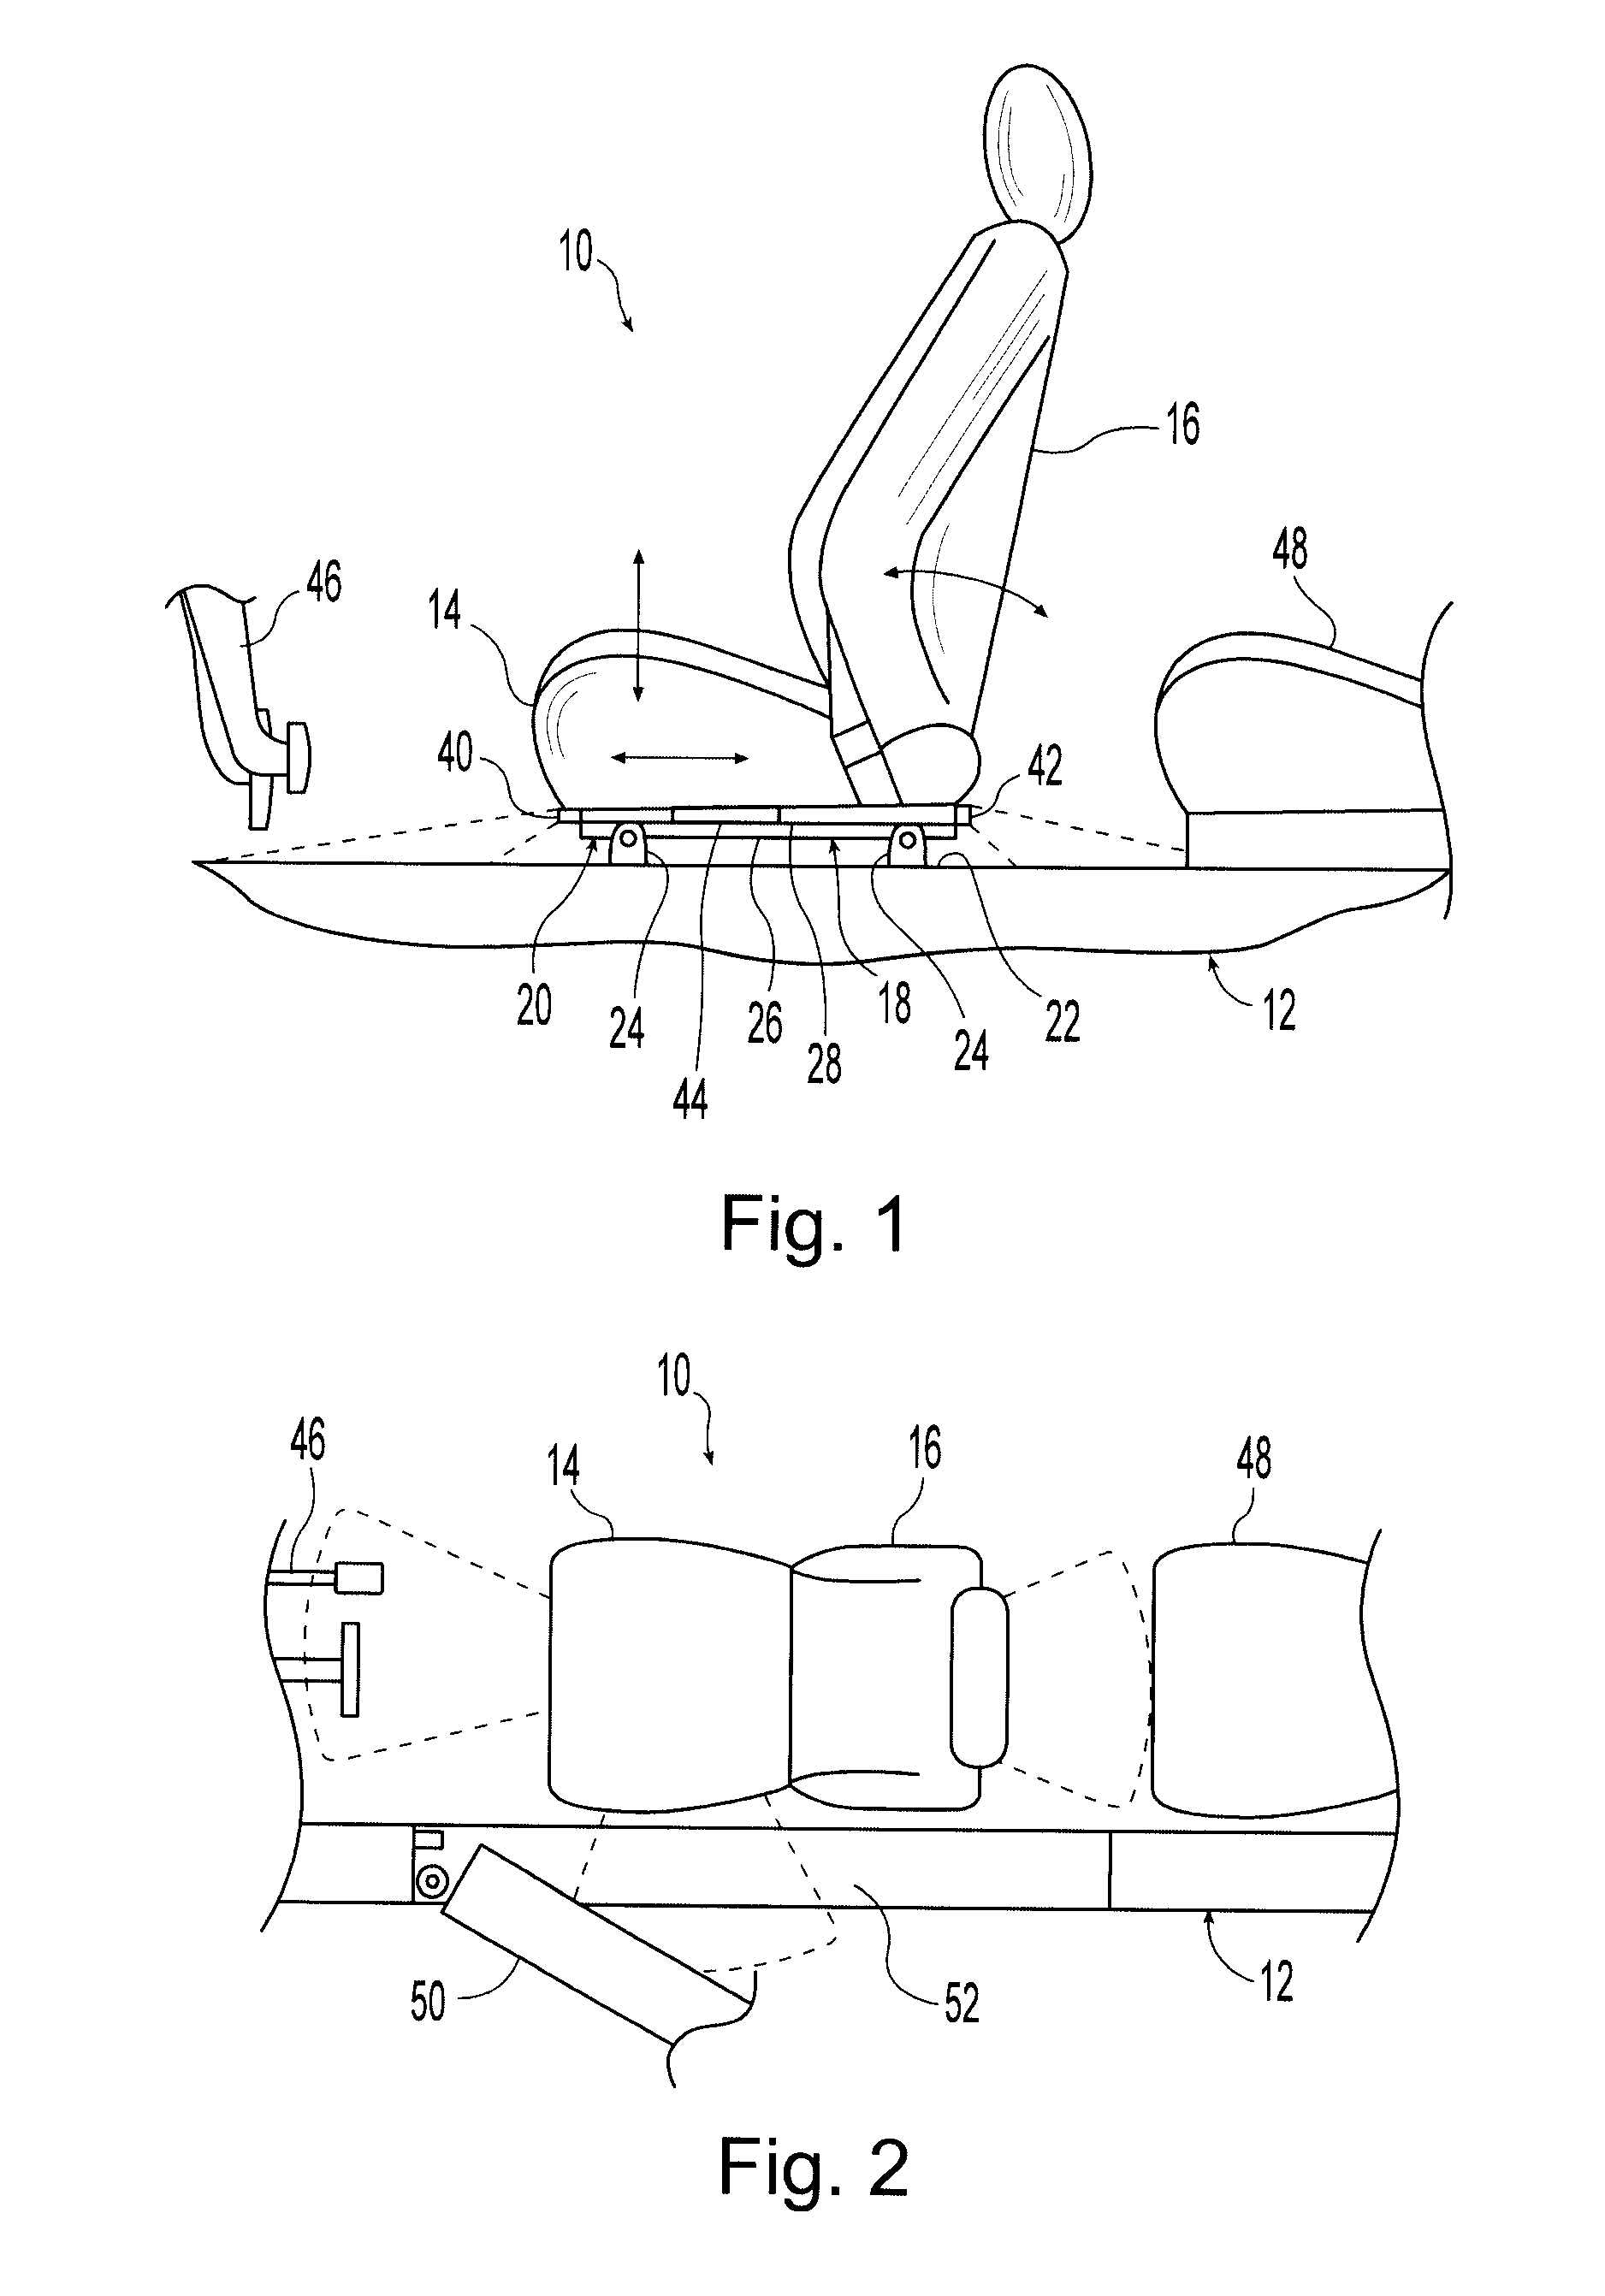 Integrated under-seat interior lighting for a motor vehicle seat